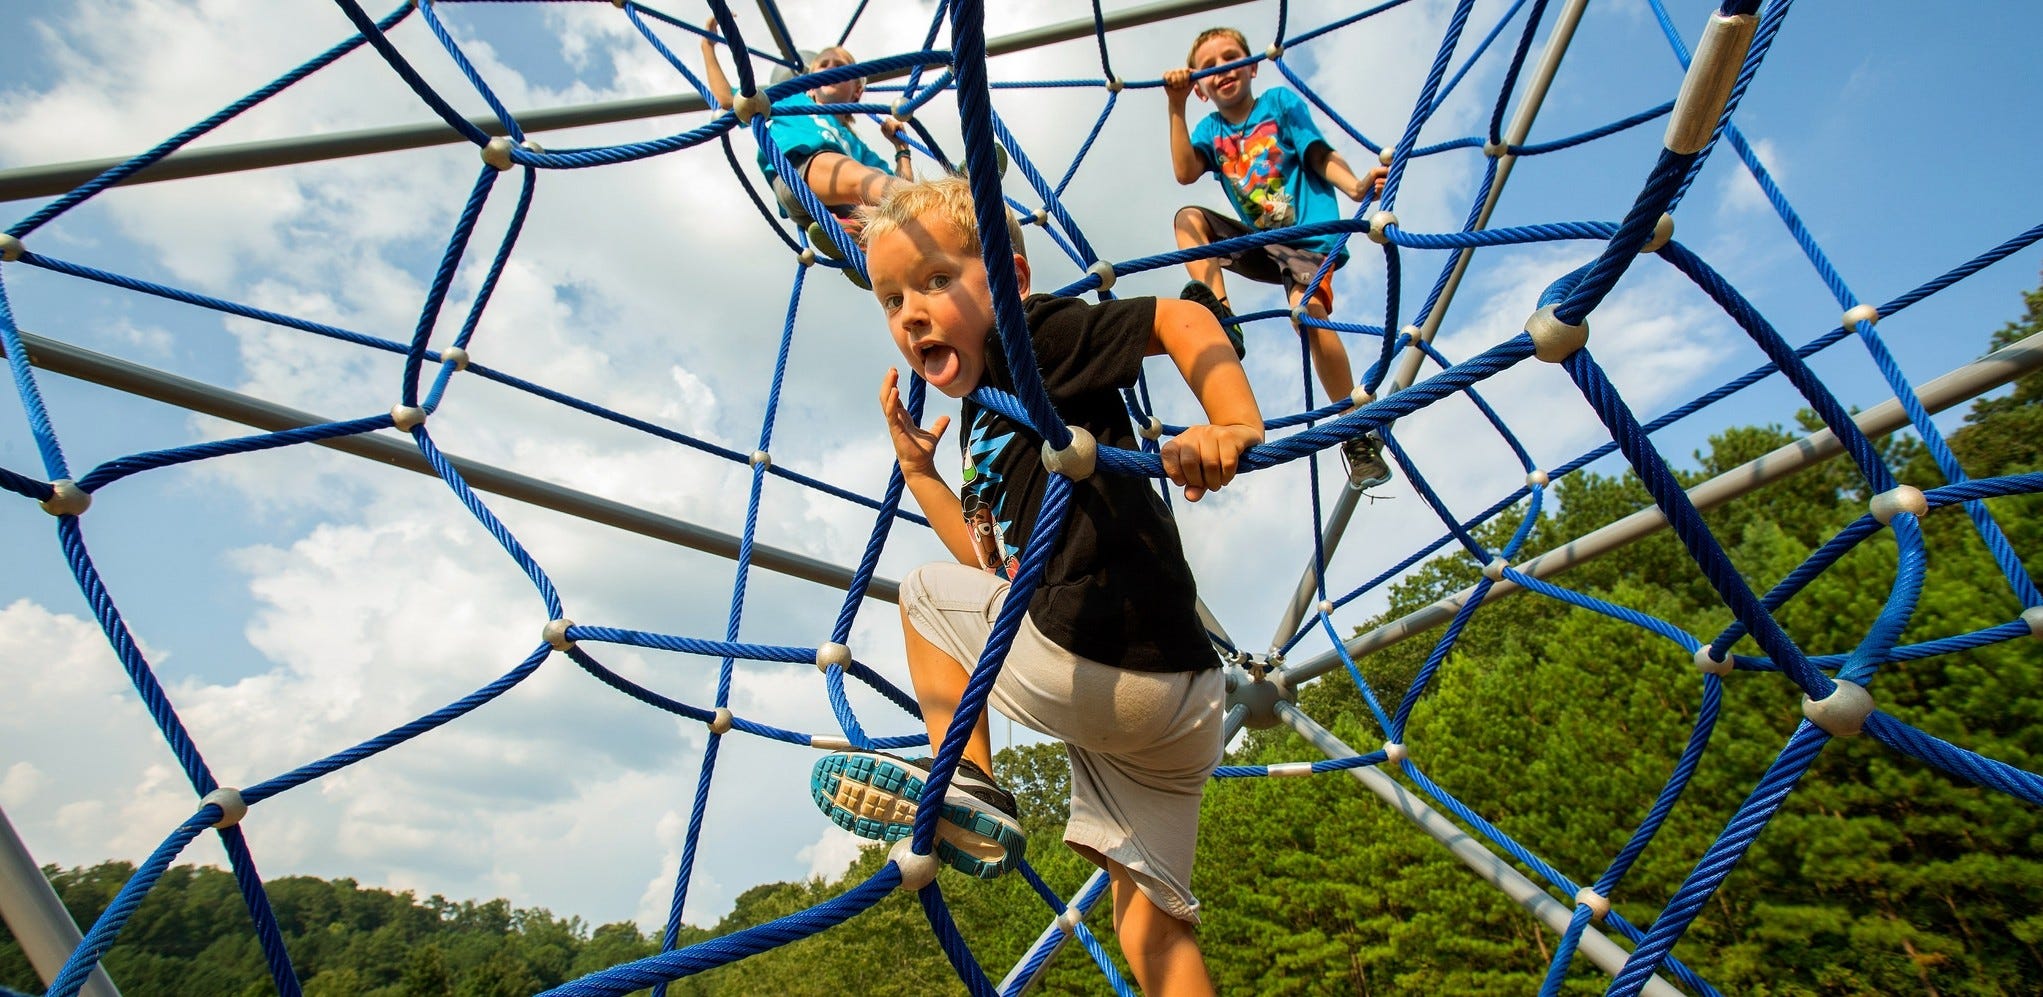 Introducing KidNetix Ropes Courses for Parks and Playgrounds